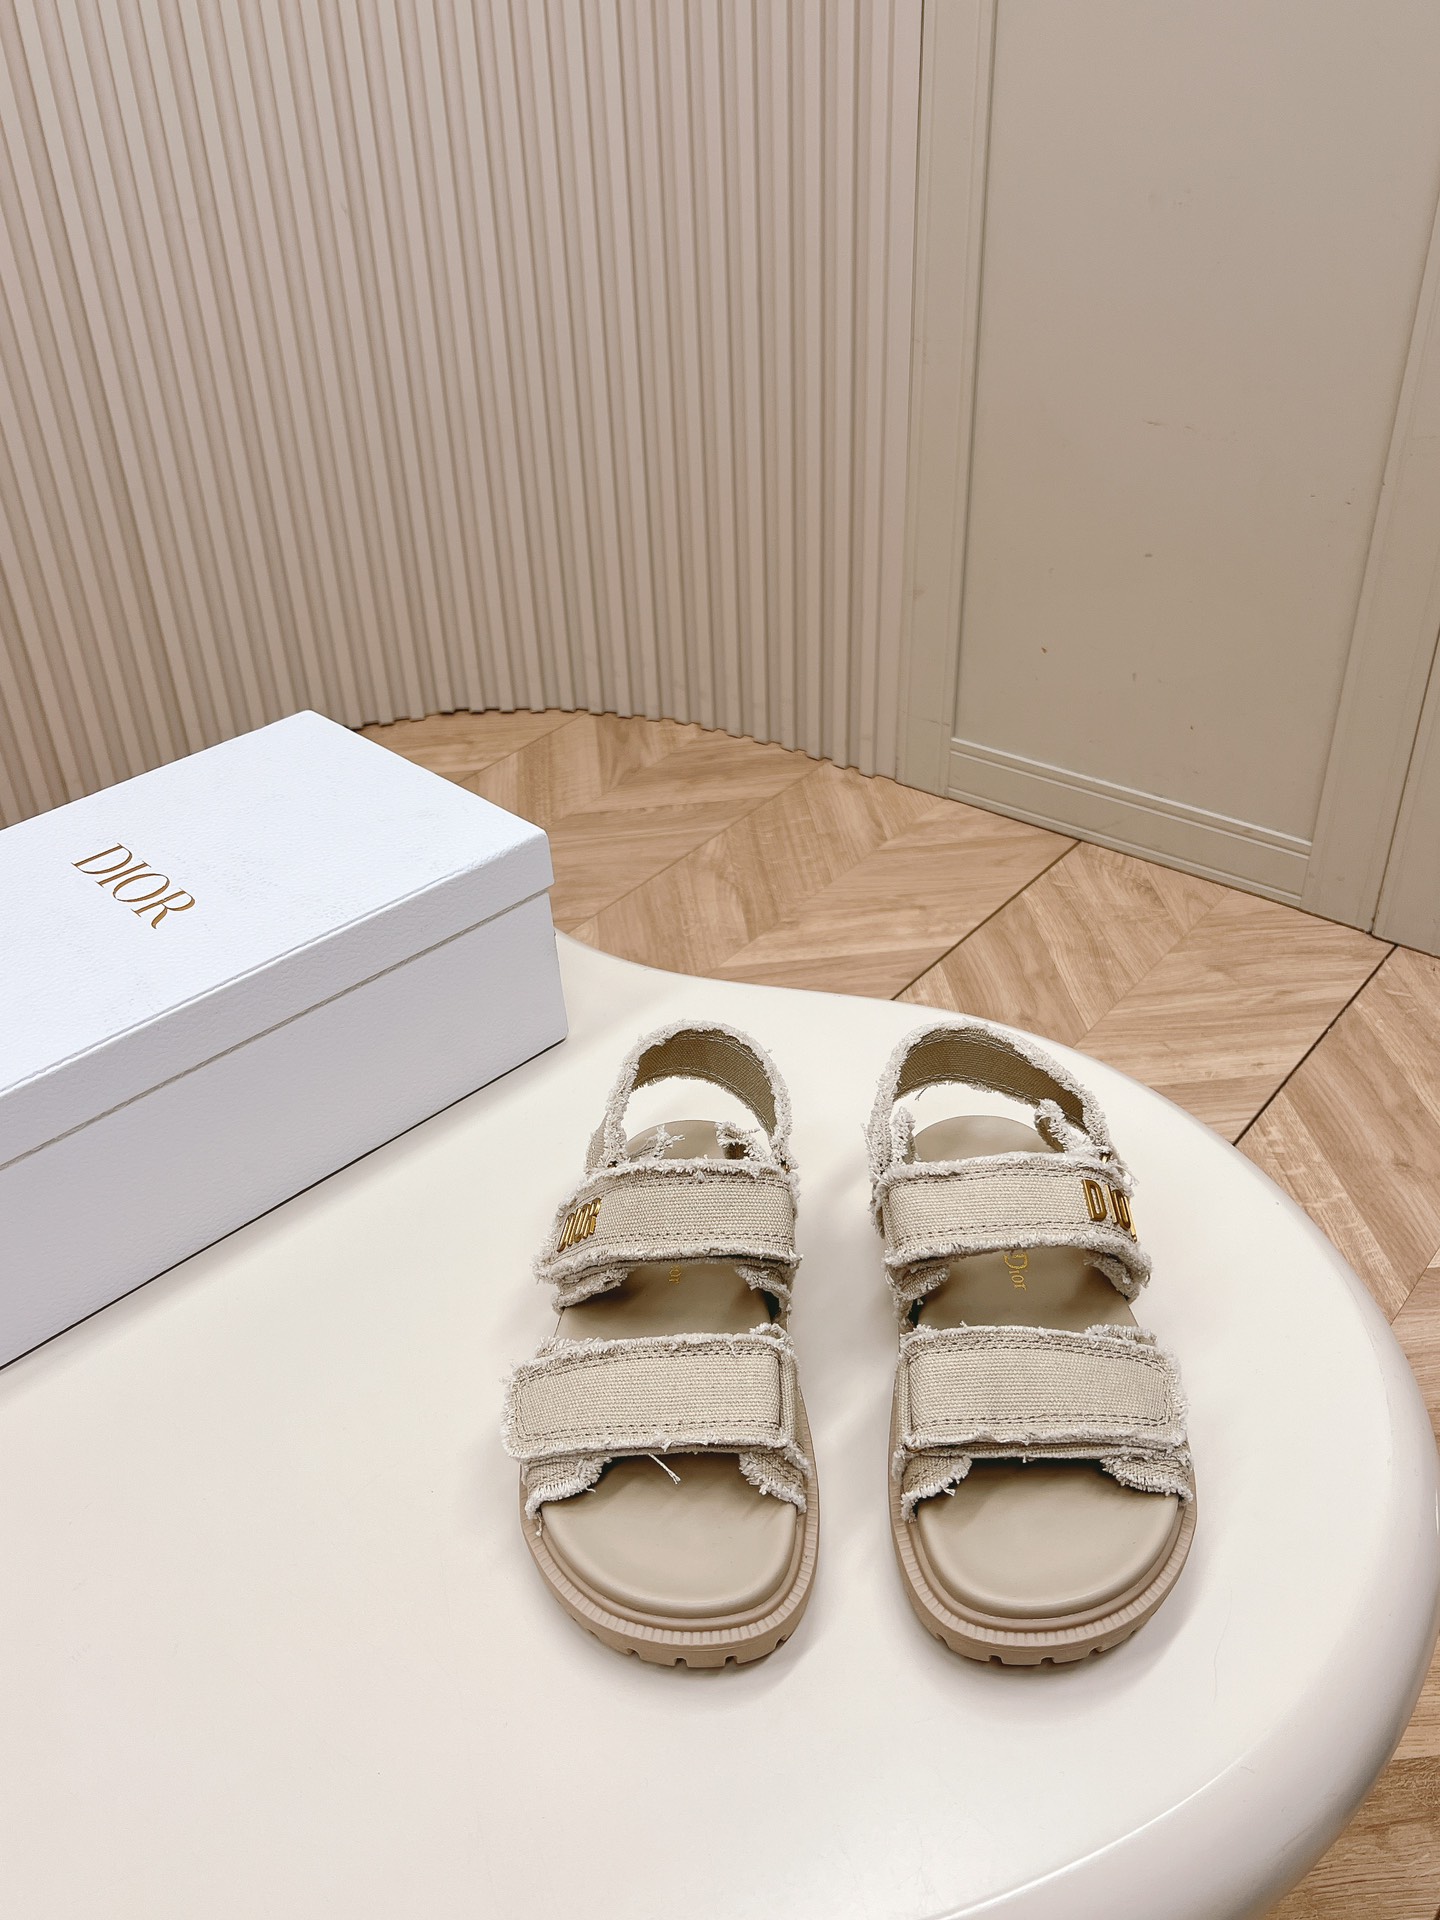 Dior Shoes Sandals Slippers Gold Hardware TPU